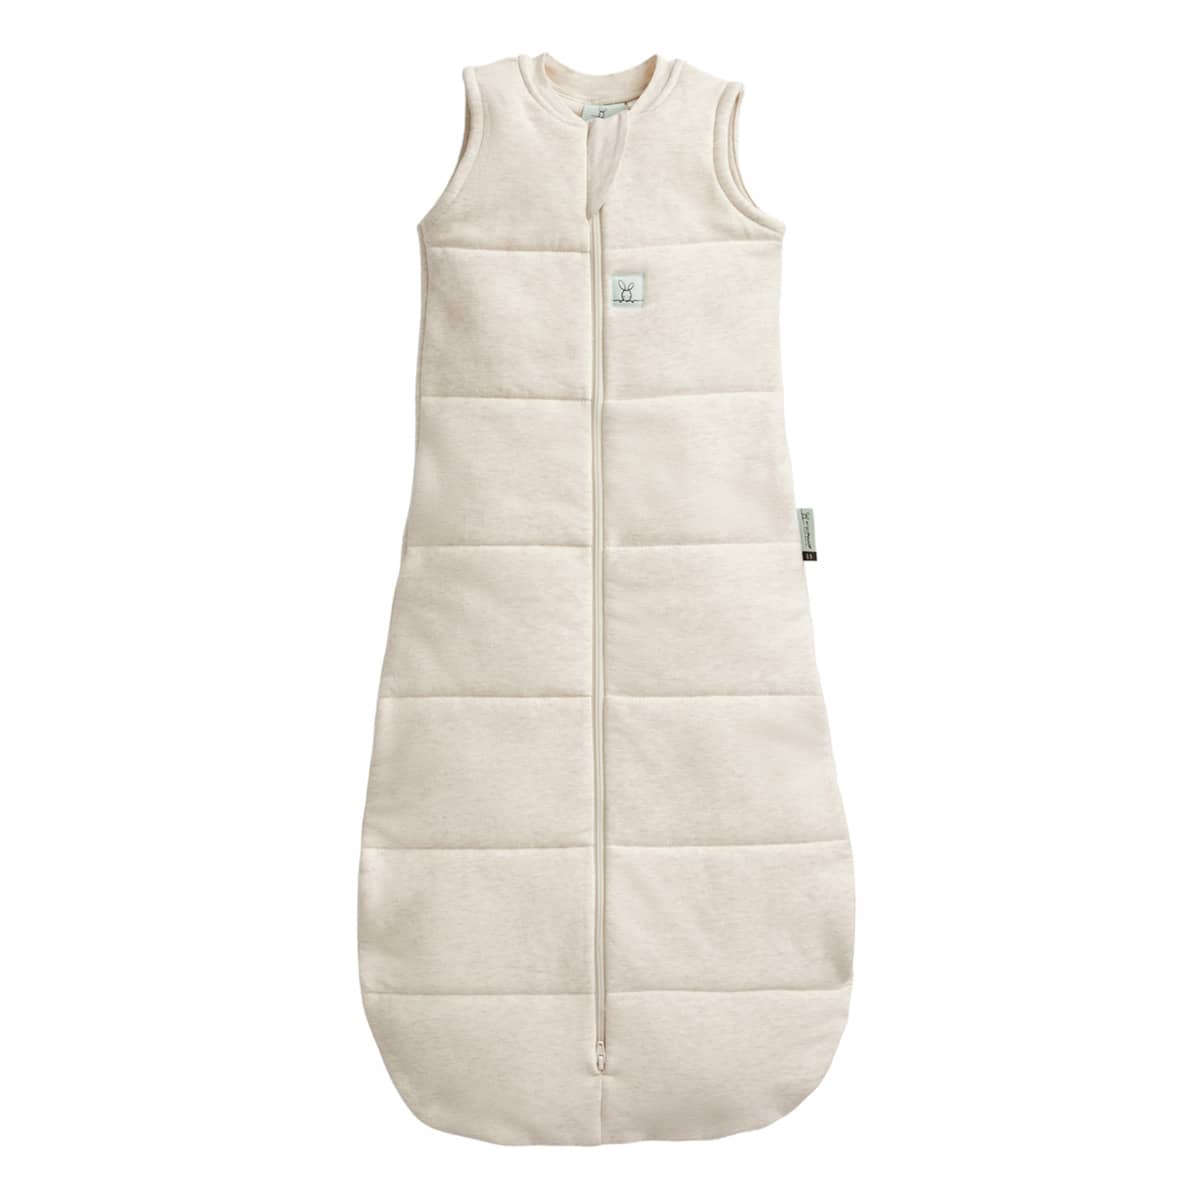 ergoPouch Jersey Sleeping Bag 2.5 TOG - Oatmeal Marle - 8 to 24 Months